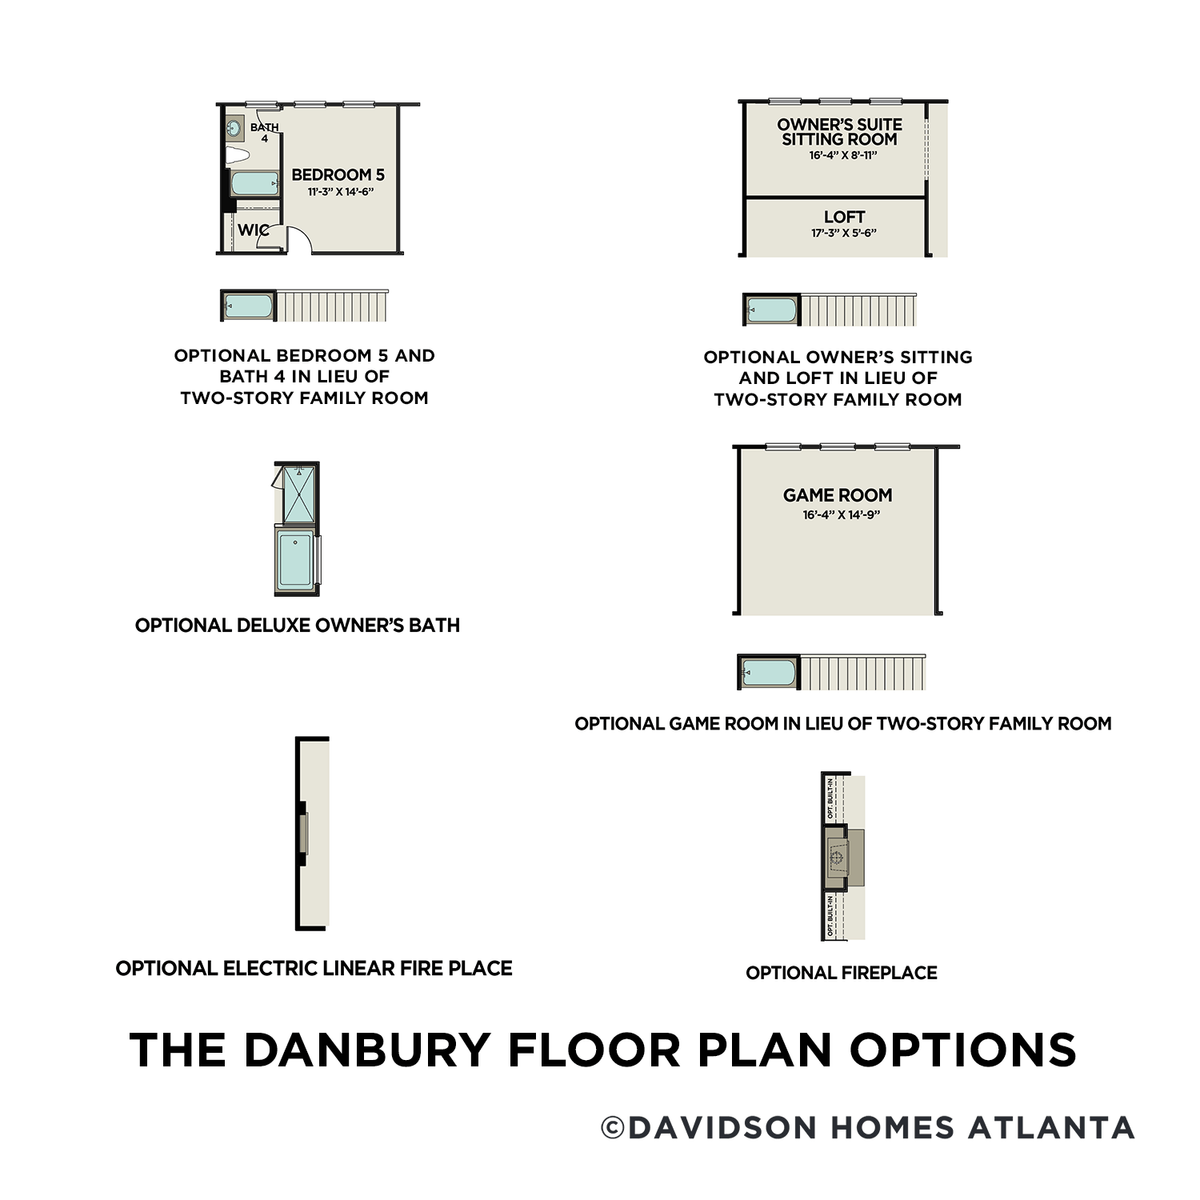 3 - The Danbury A buildable floor plan layout in Davidson Homes' Riverwood community.